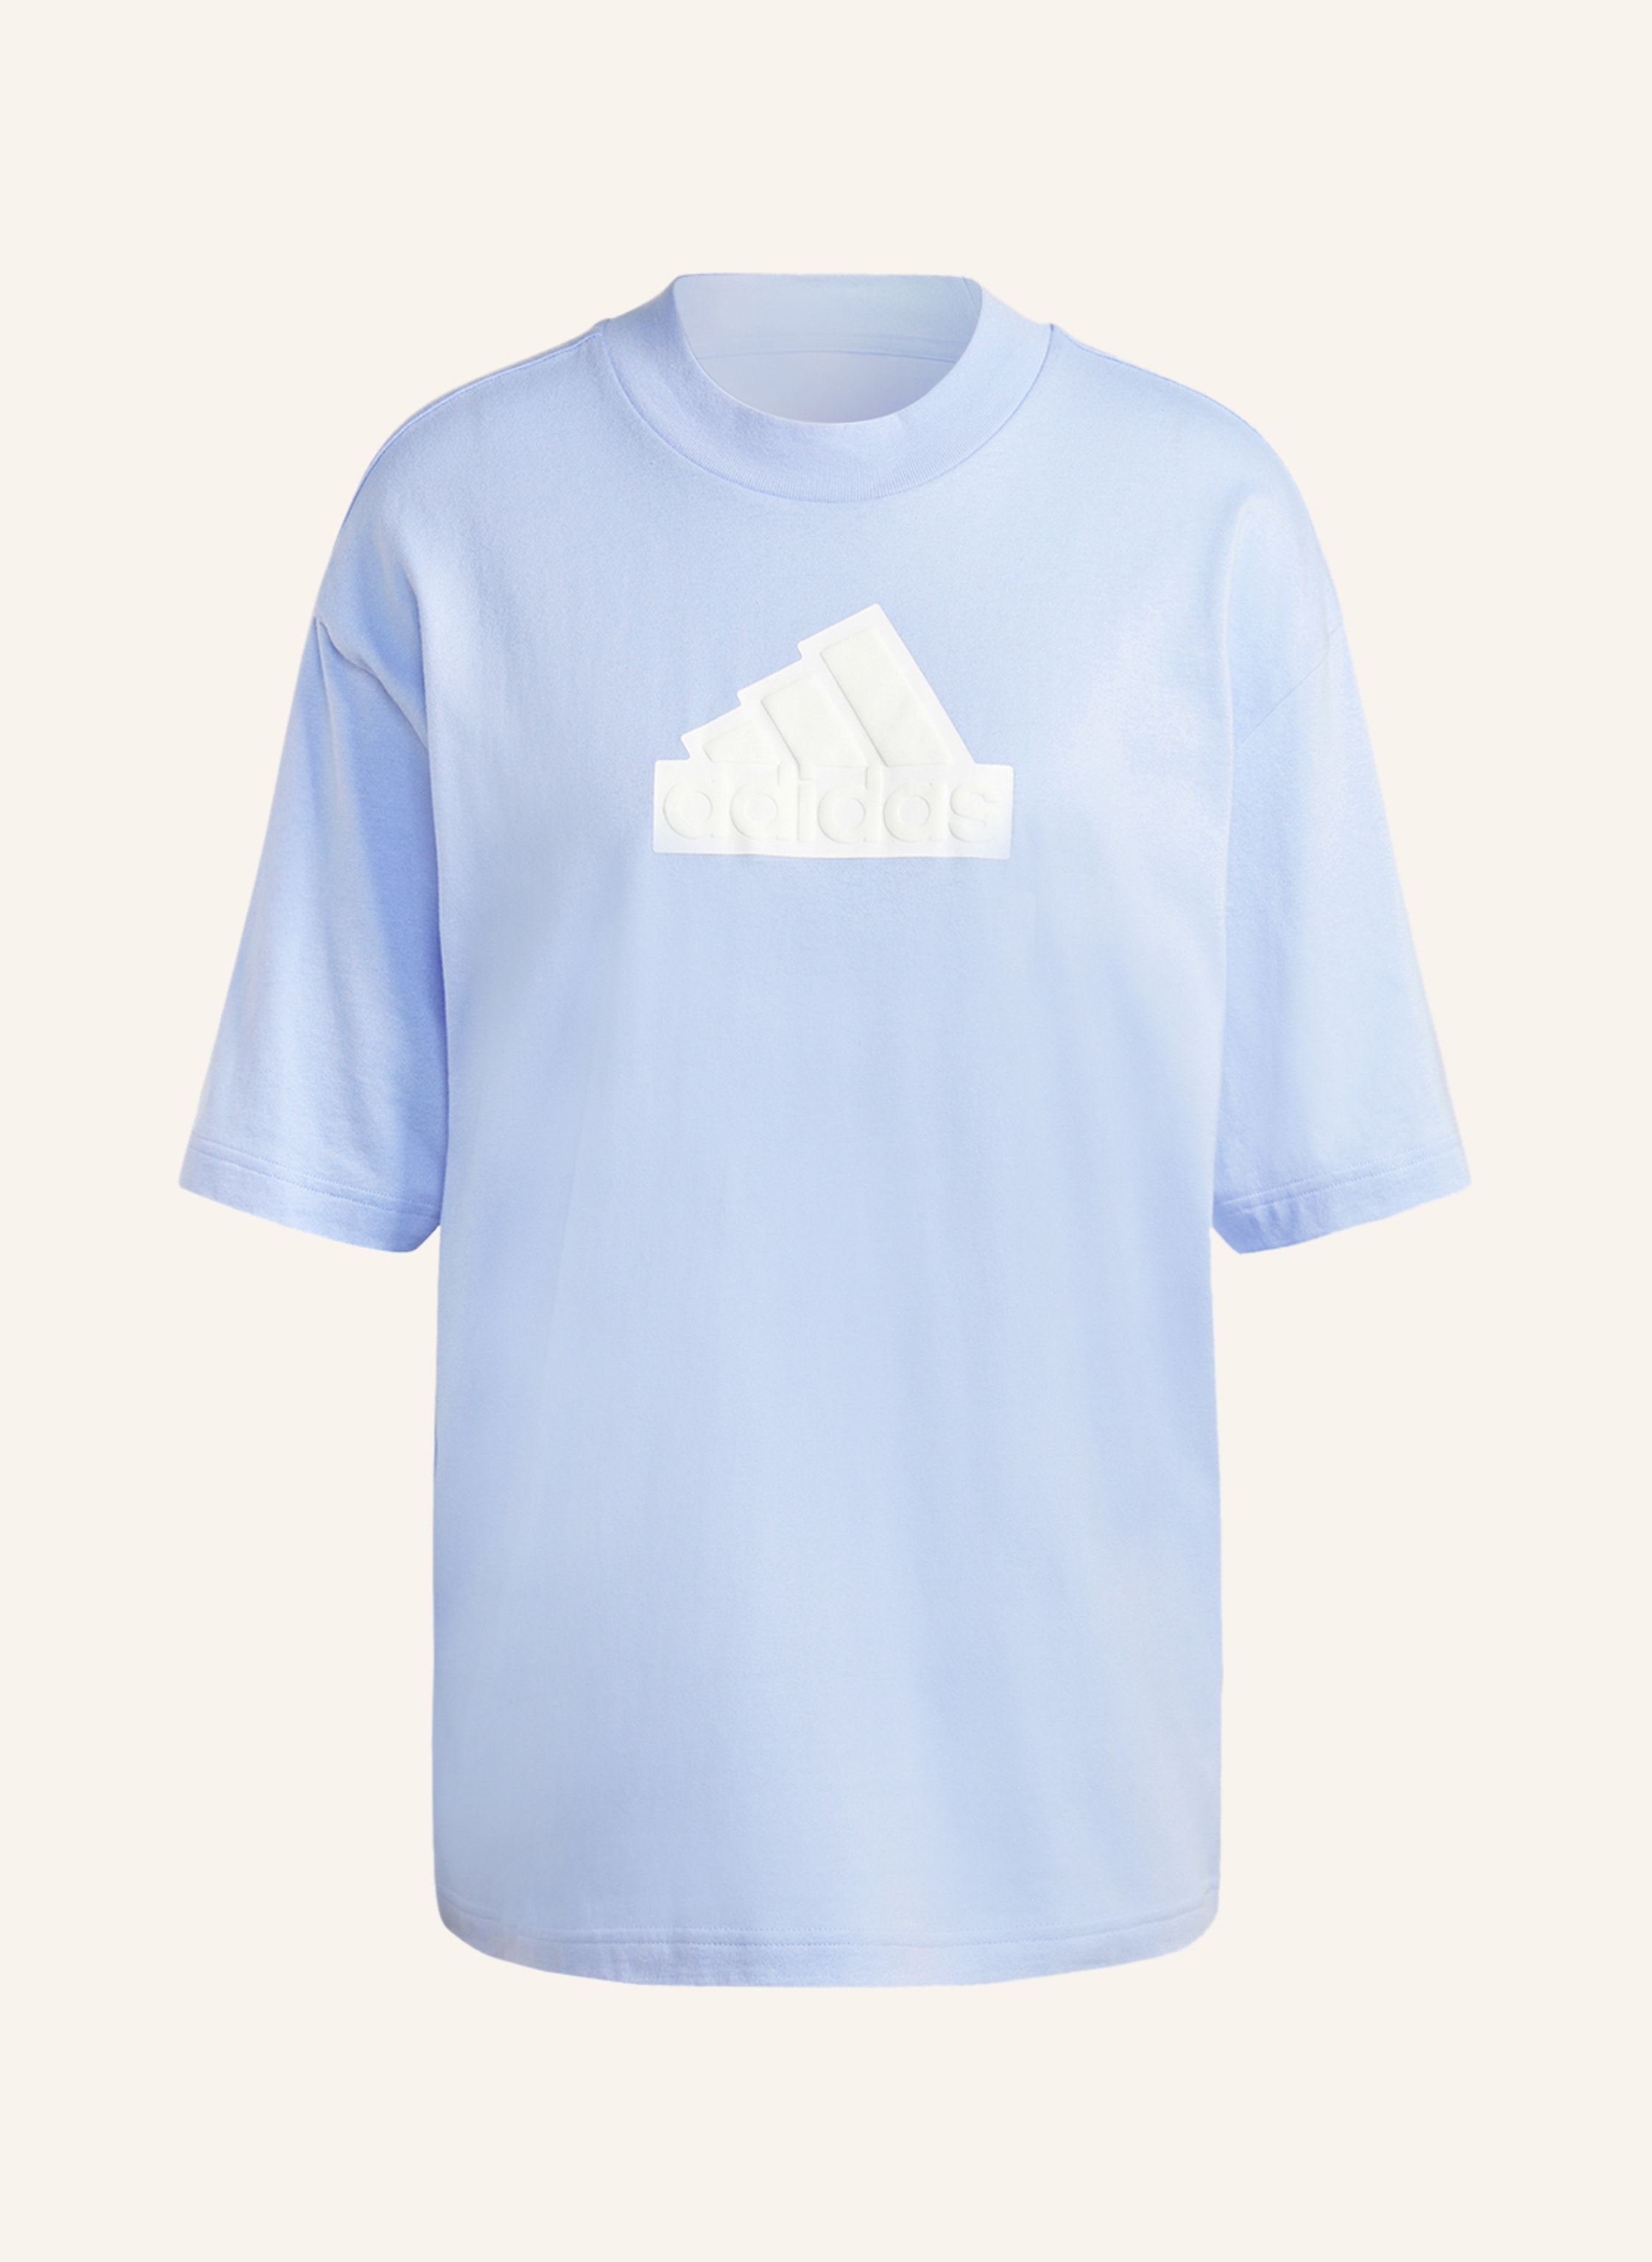 opdagelse glemme middag adidas T-shirt FUTURE ICONS in light blue